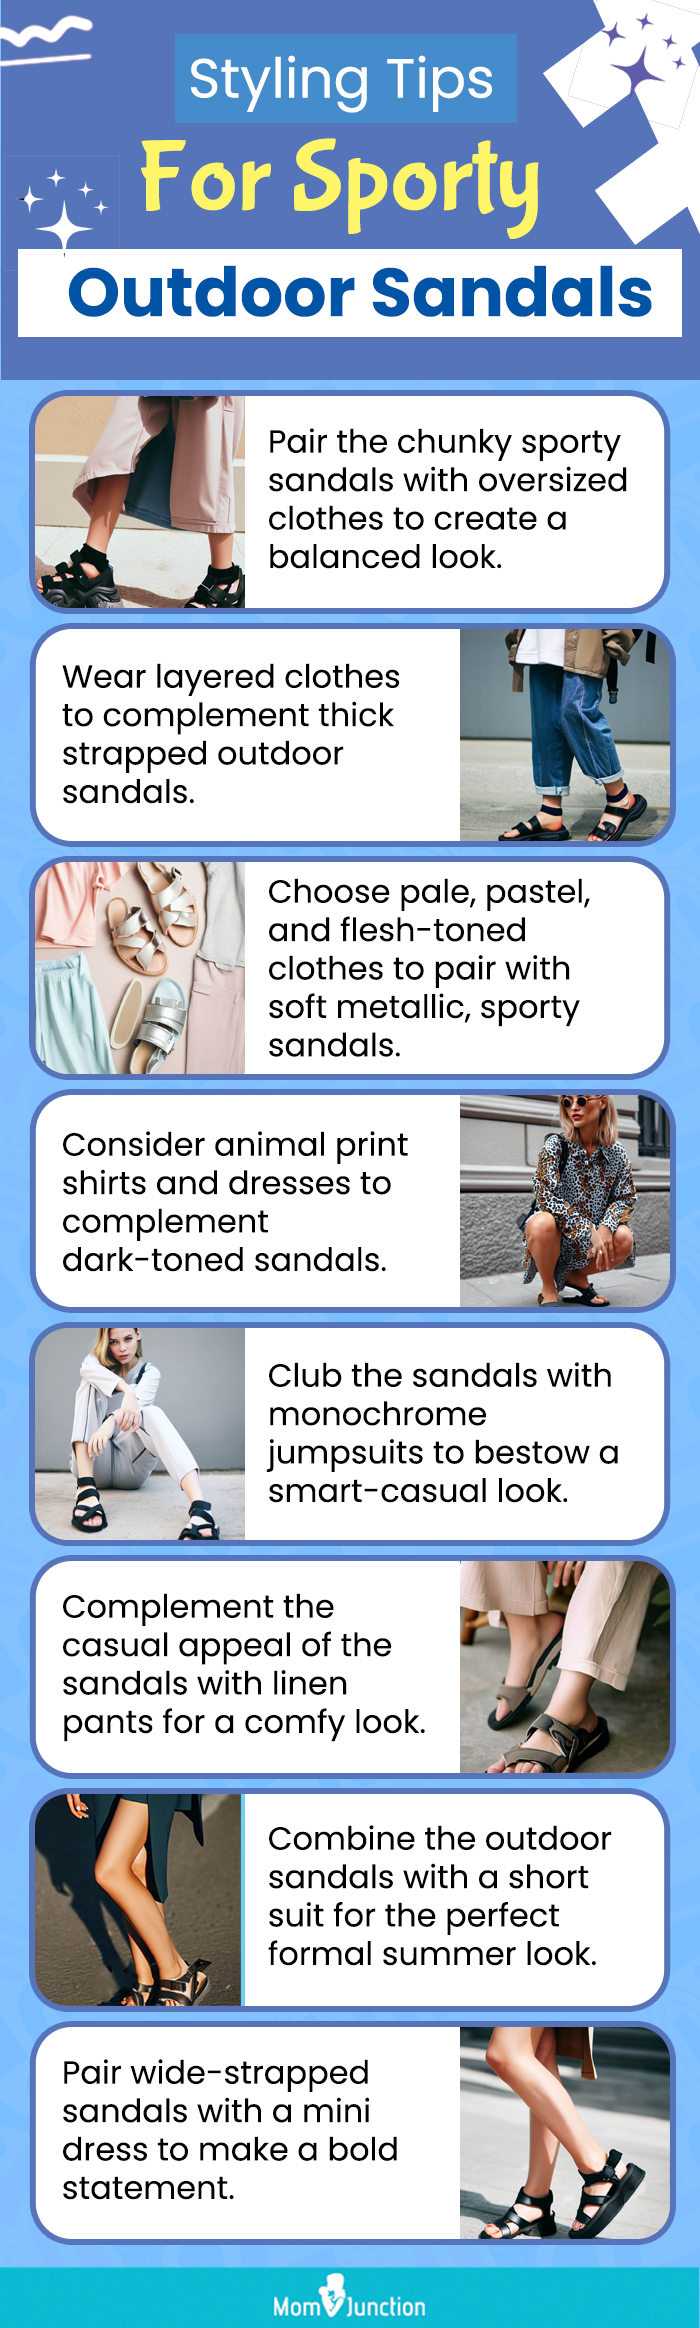 Styling Tips For Sporty Outdoor Sandals (infographic)